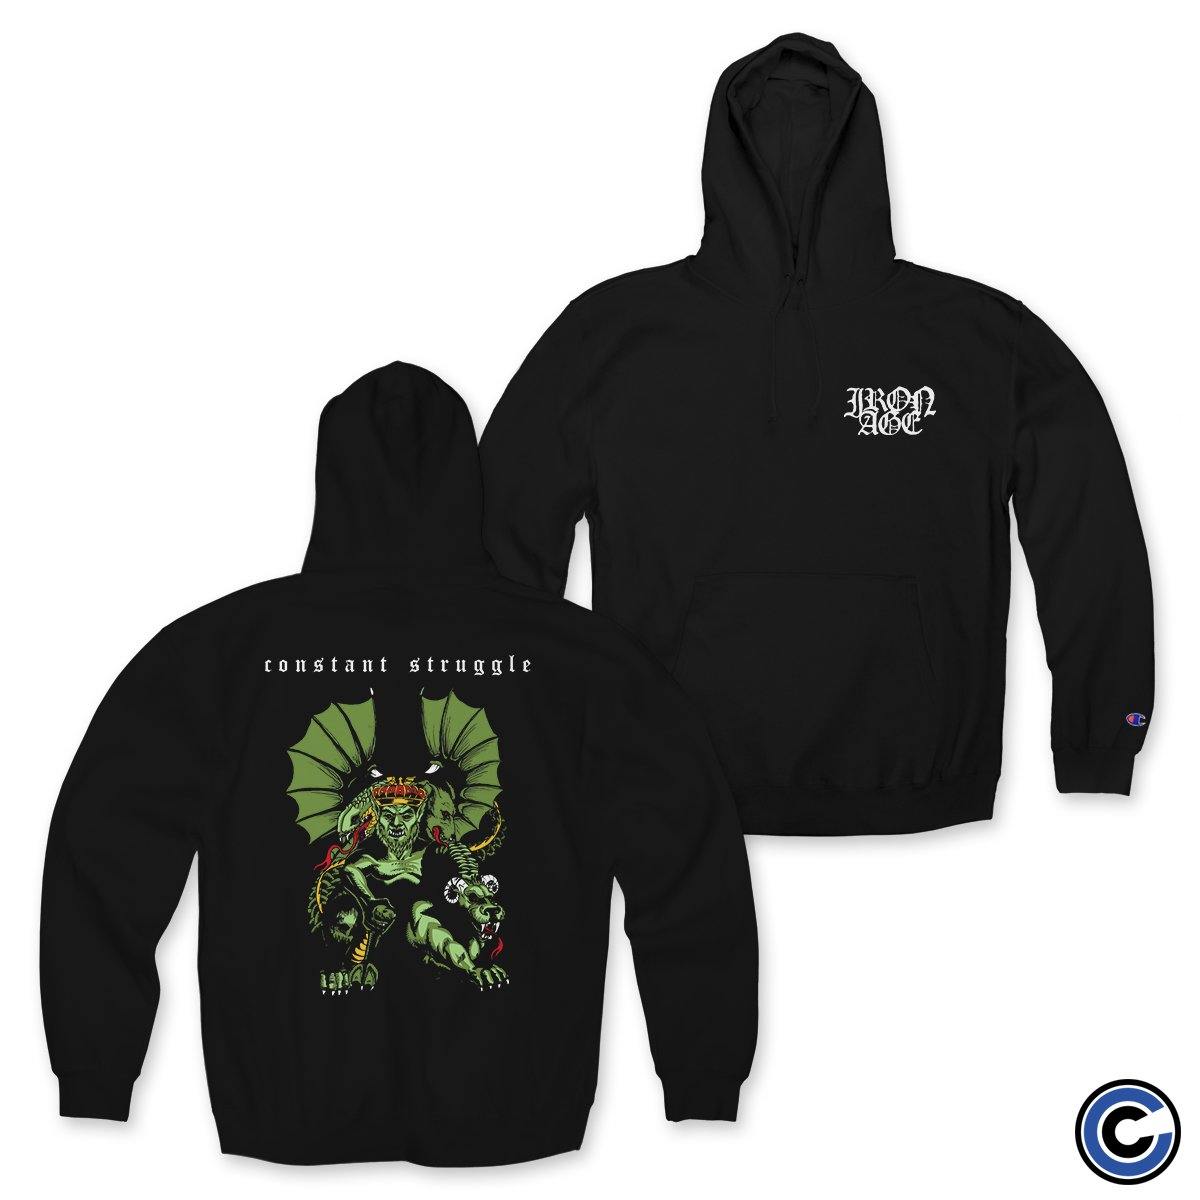 Buy – Iron Age "Constant Struggle" Hoodie – Band & Music Merch – Cold Cuts Merch